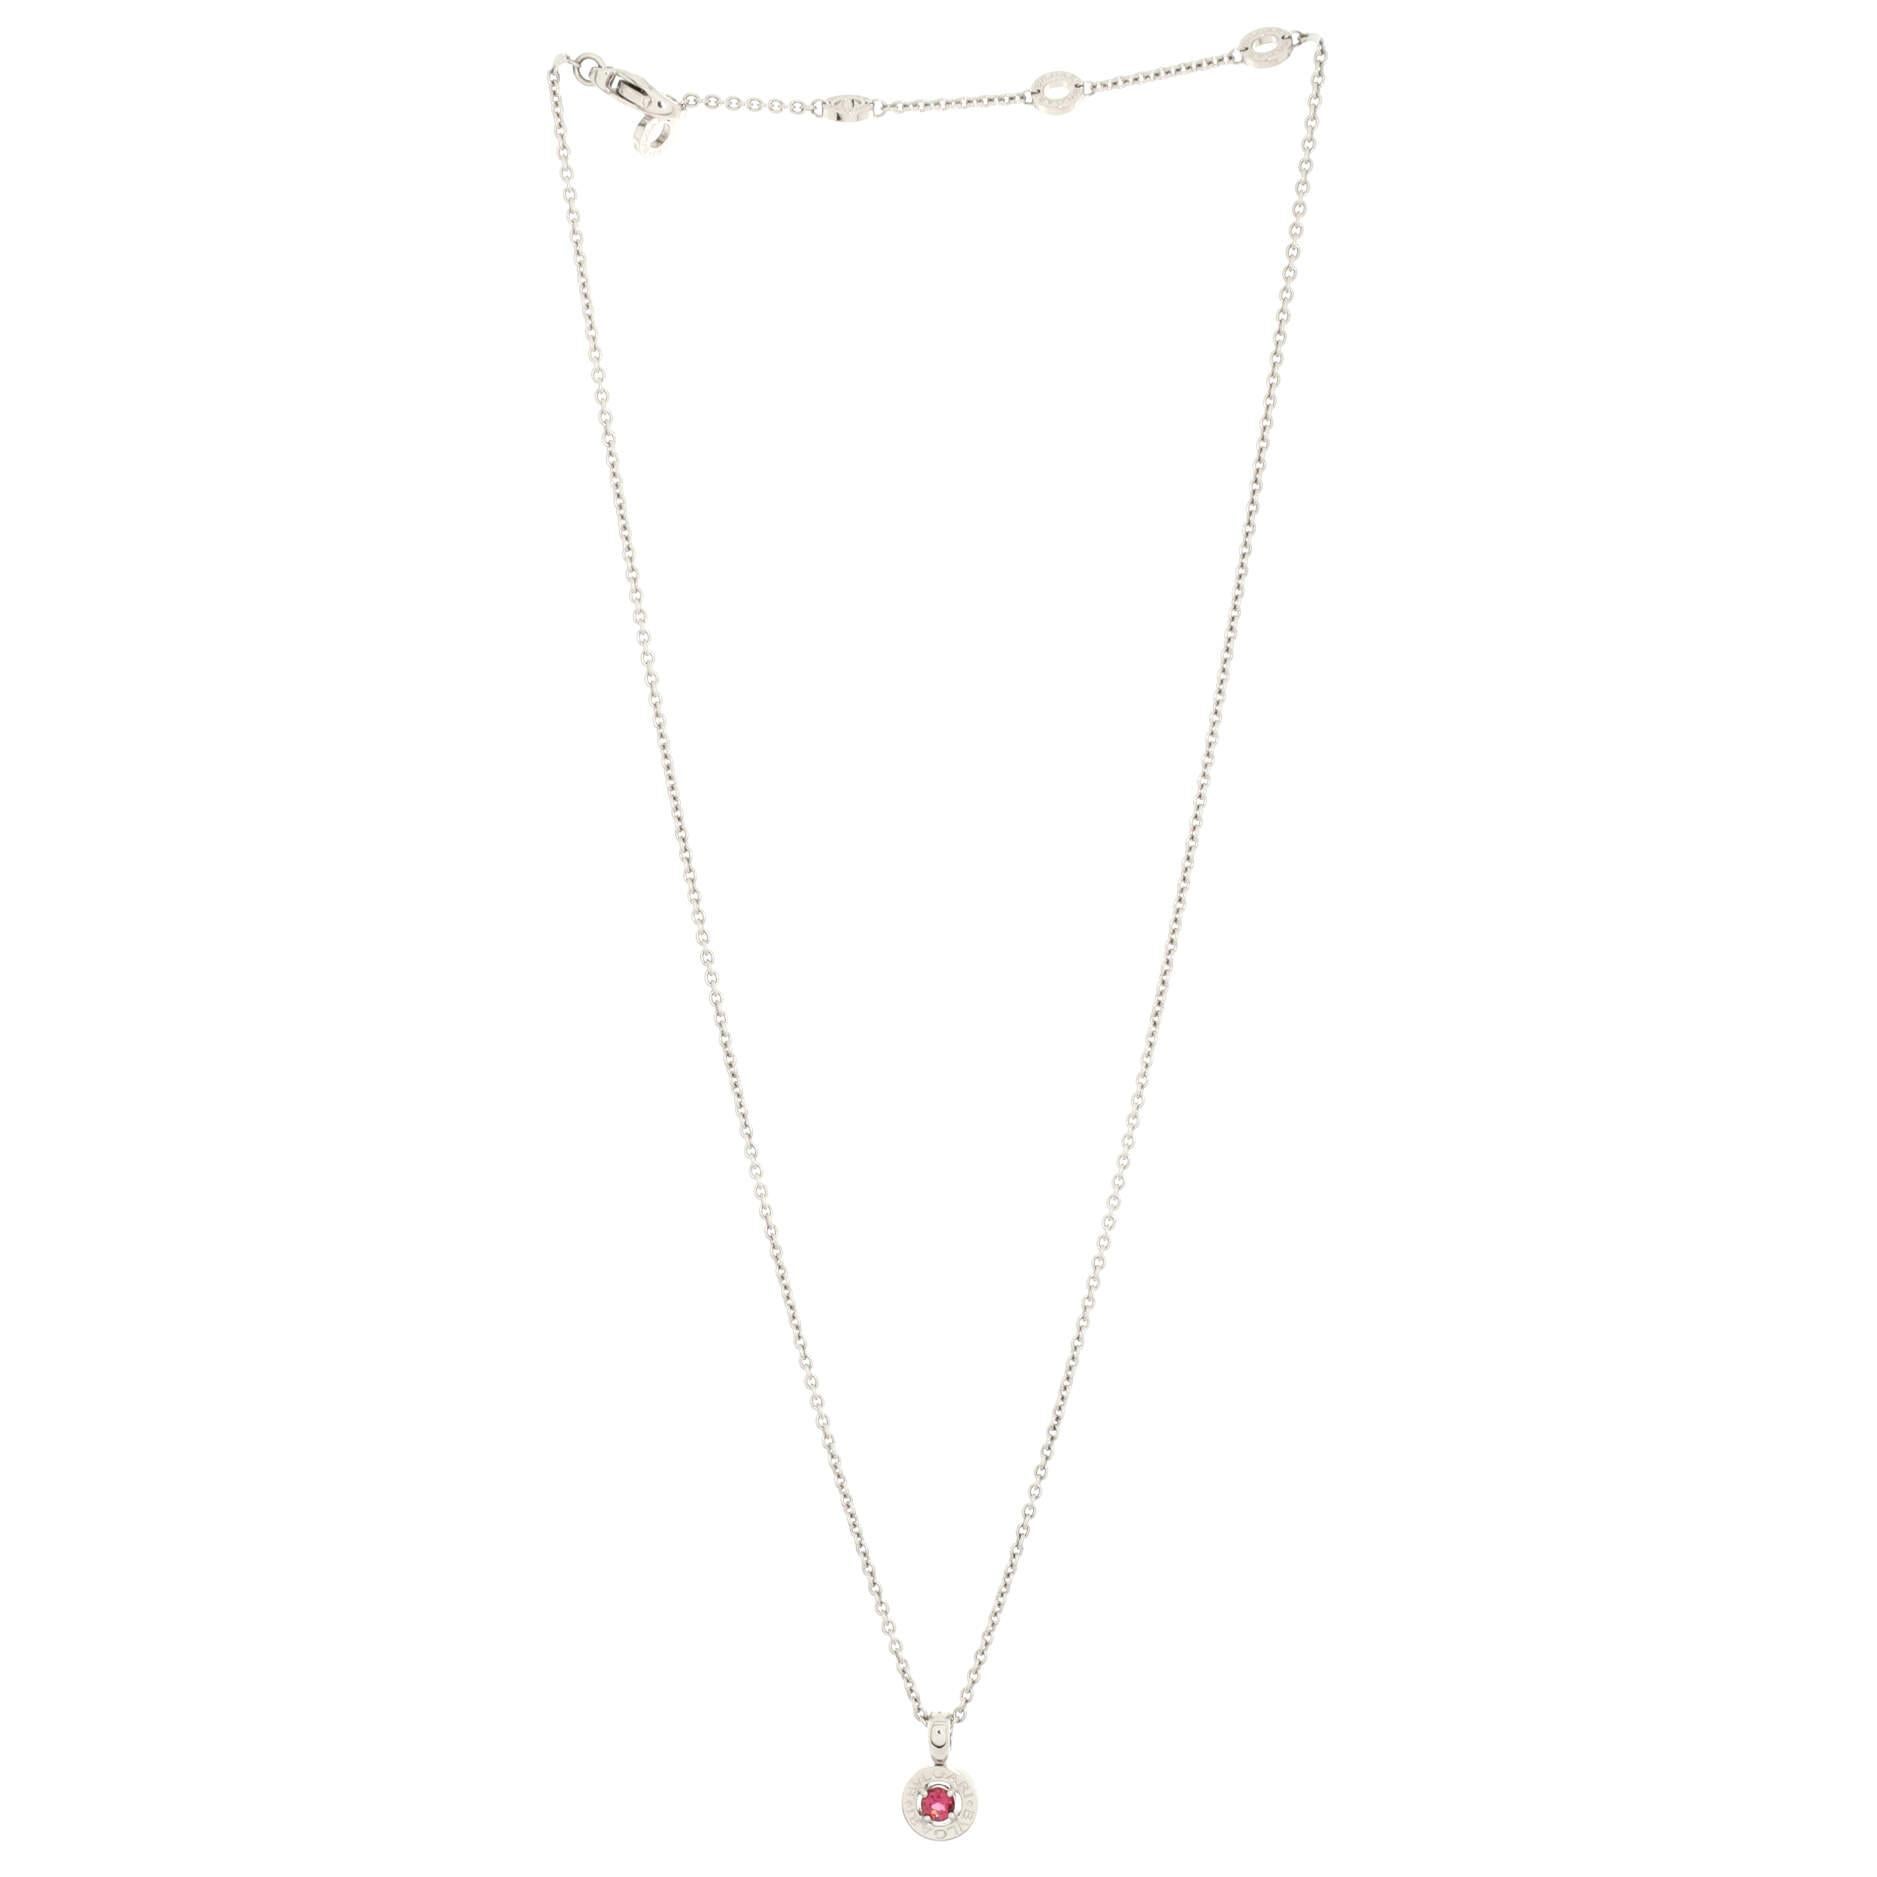 Bvlgari Bvlgari Bvlgari Pendant Necklace 18K White Gold with Diamonds and Pink In Good Condition For Sale In New York, NY